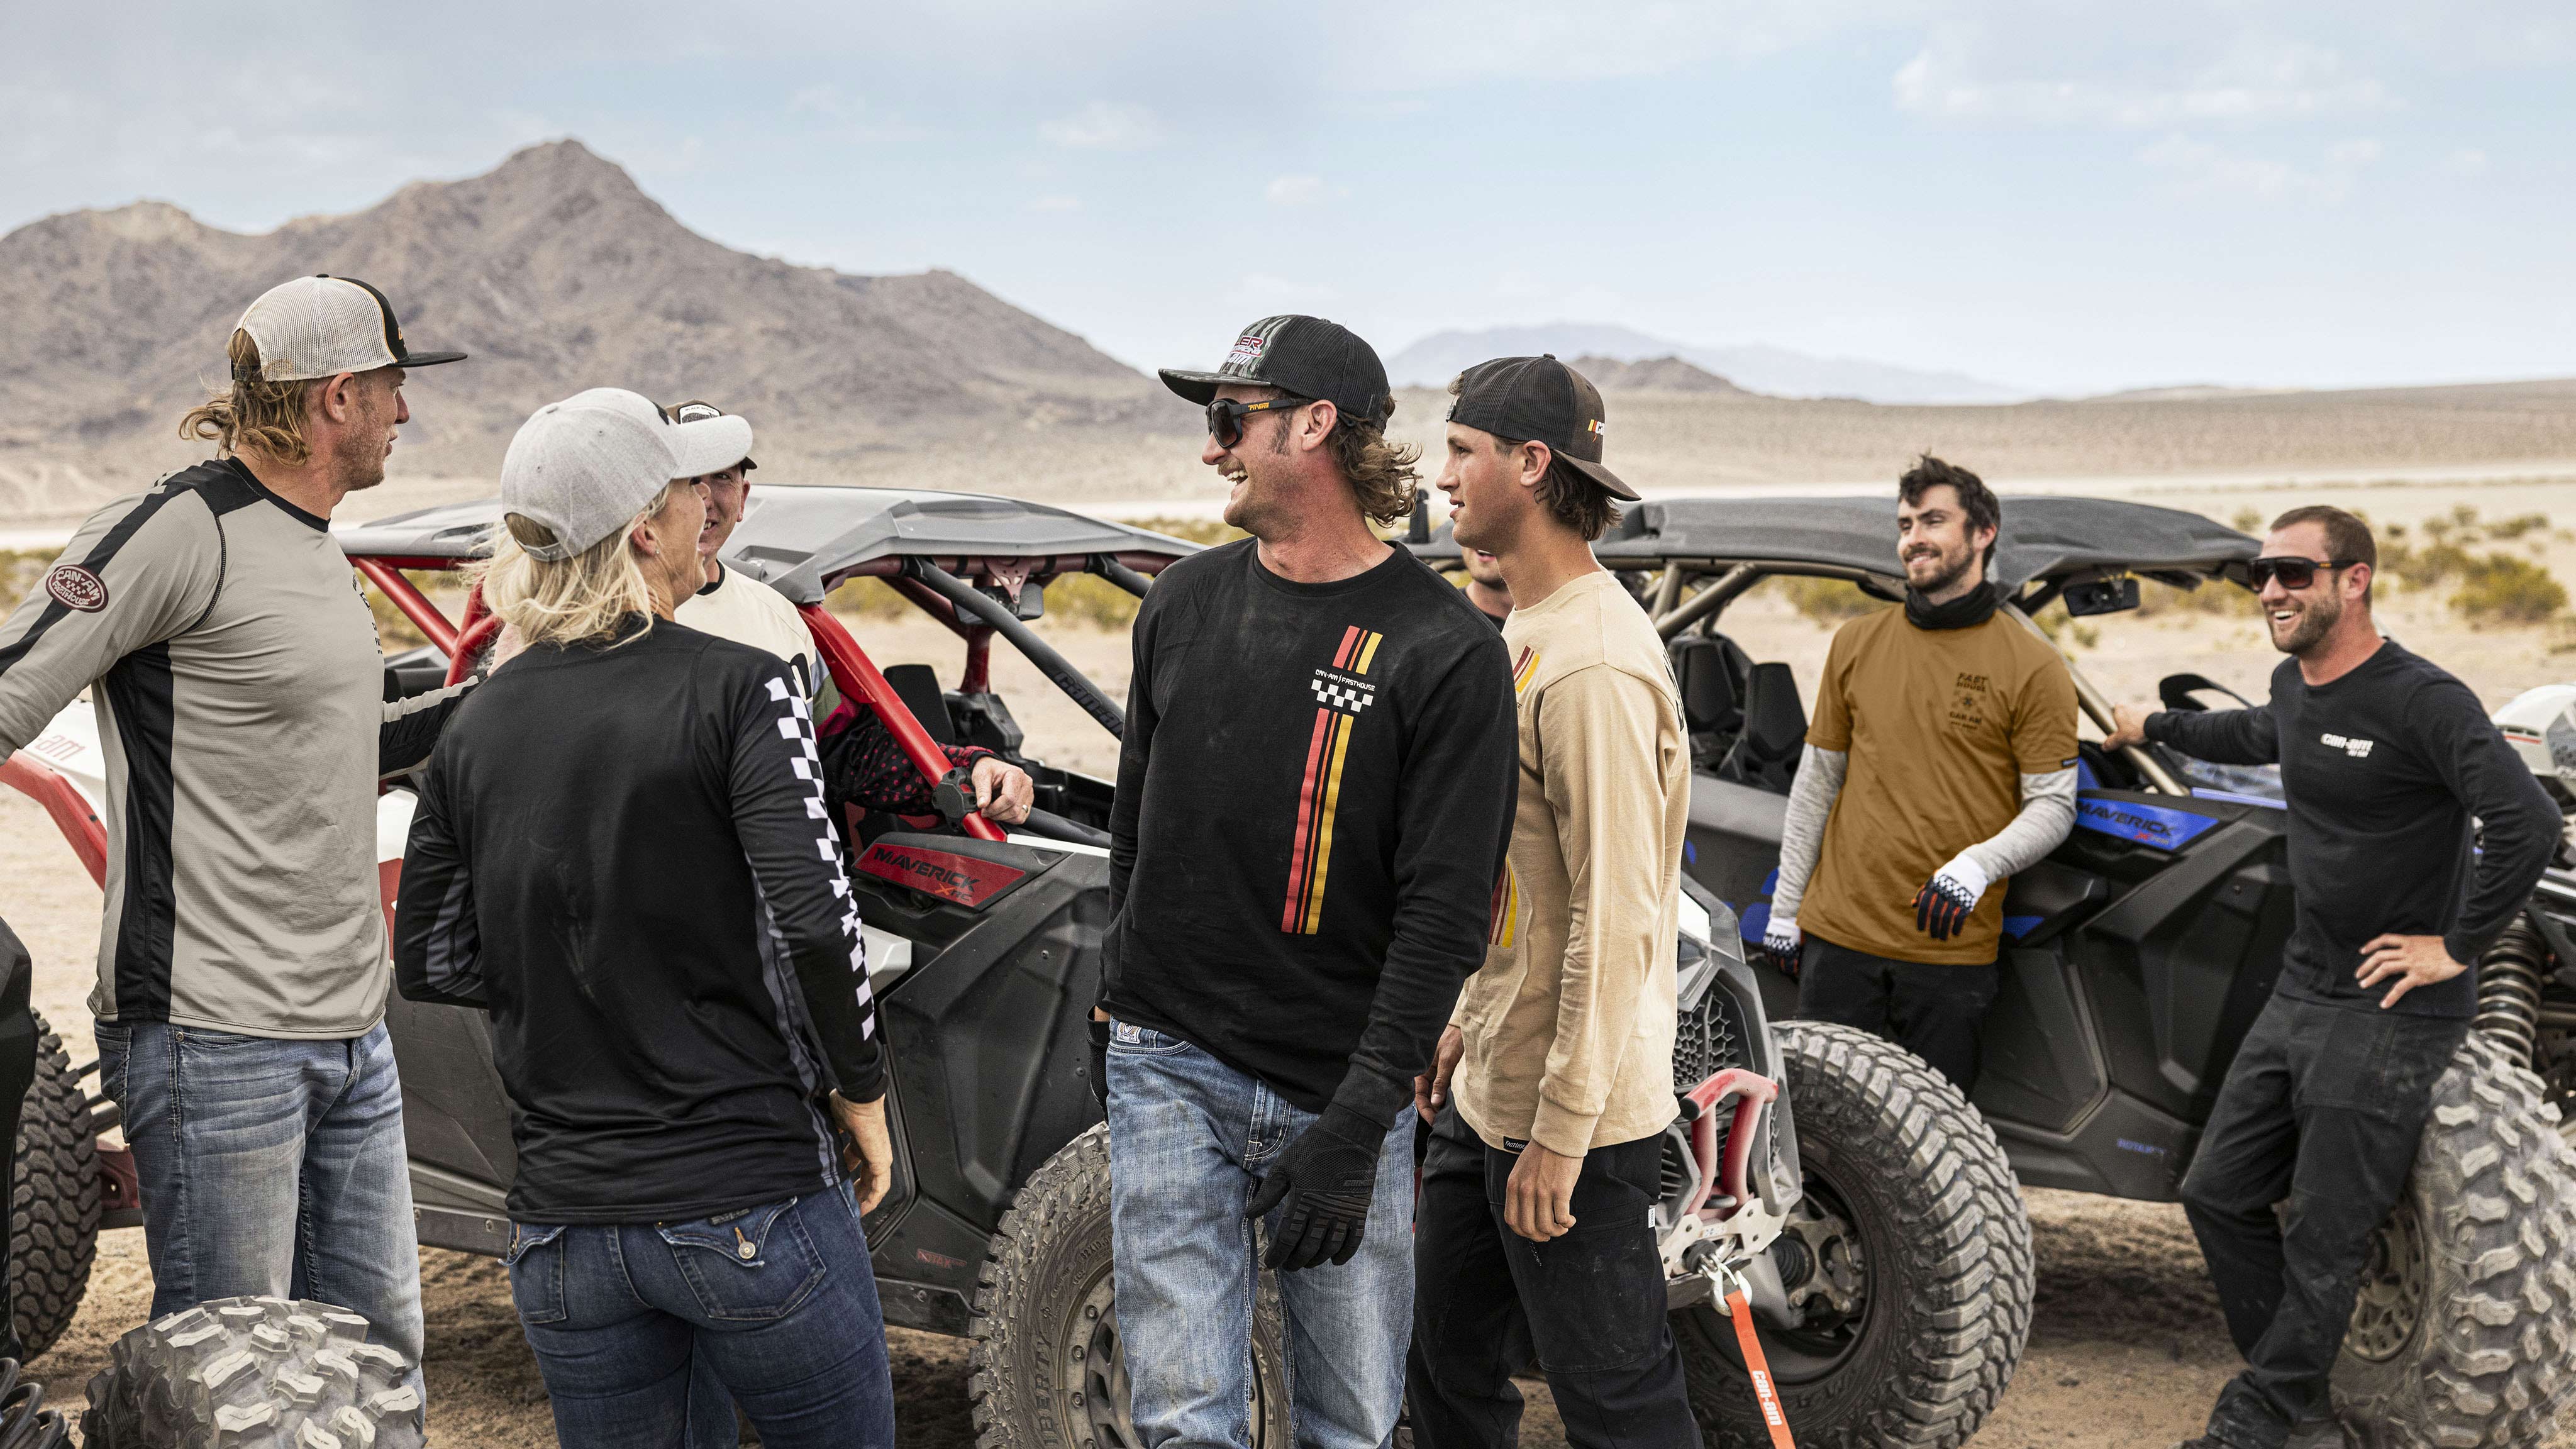 Group of riders talking next to Can-Am Off-Road vehicles